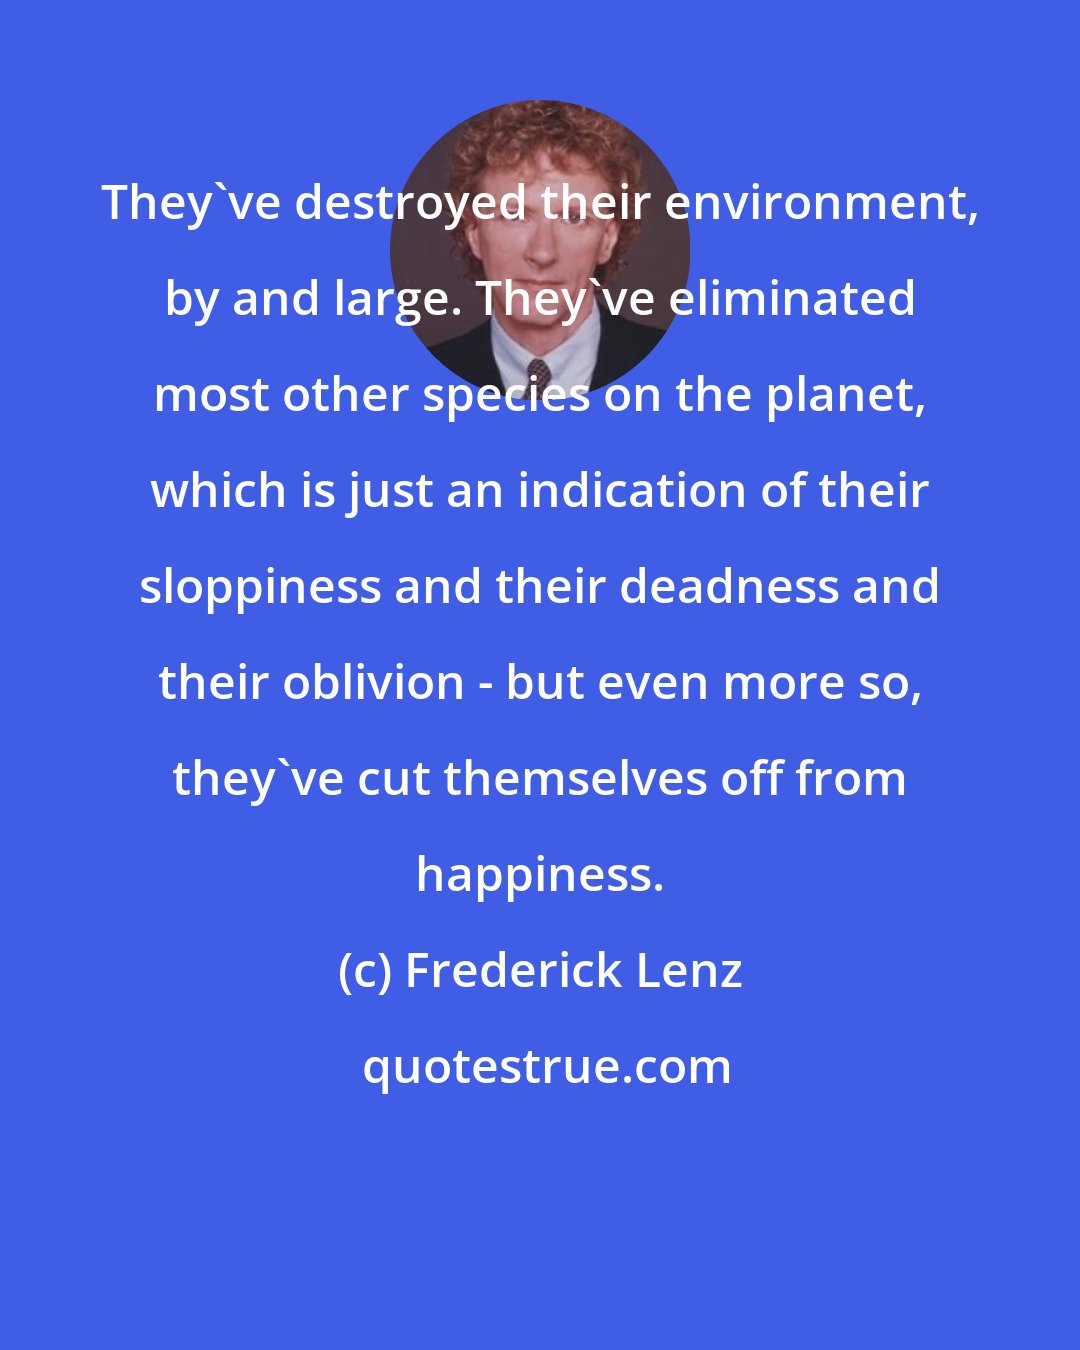 Frederick Lenz: They've destroyed their environment, by and large. They've eliminated most other species on the planet, which is just an indication of their sloppiness and their deadness and their oblivion - but even more so, they've cut themselves off from happiness.